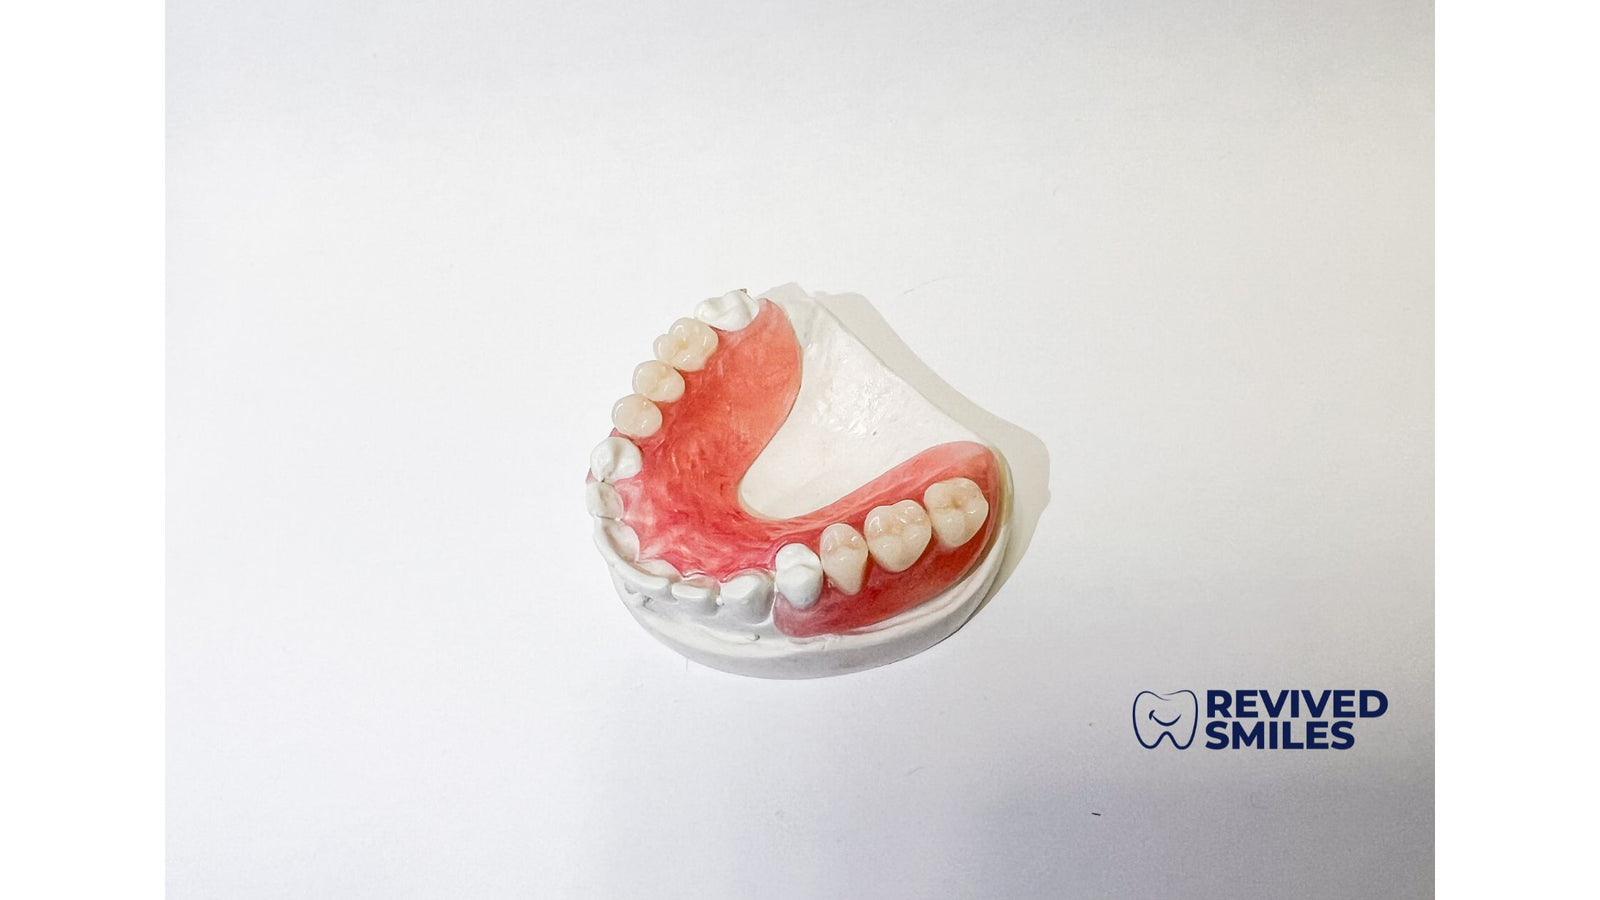 Improving the Fit of Your Flexible Partial Denture at Home